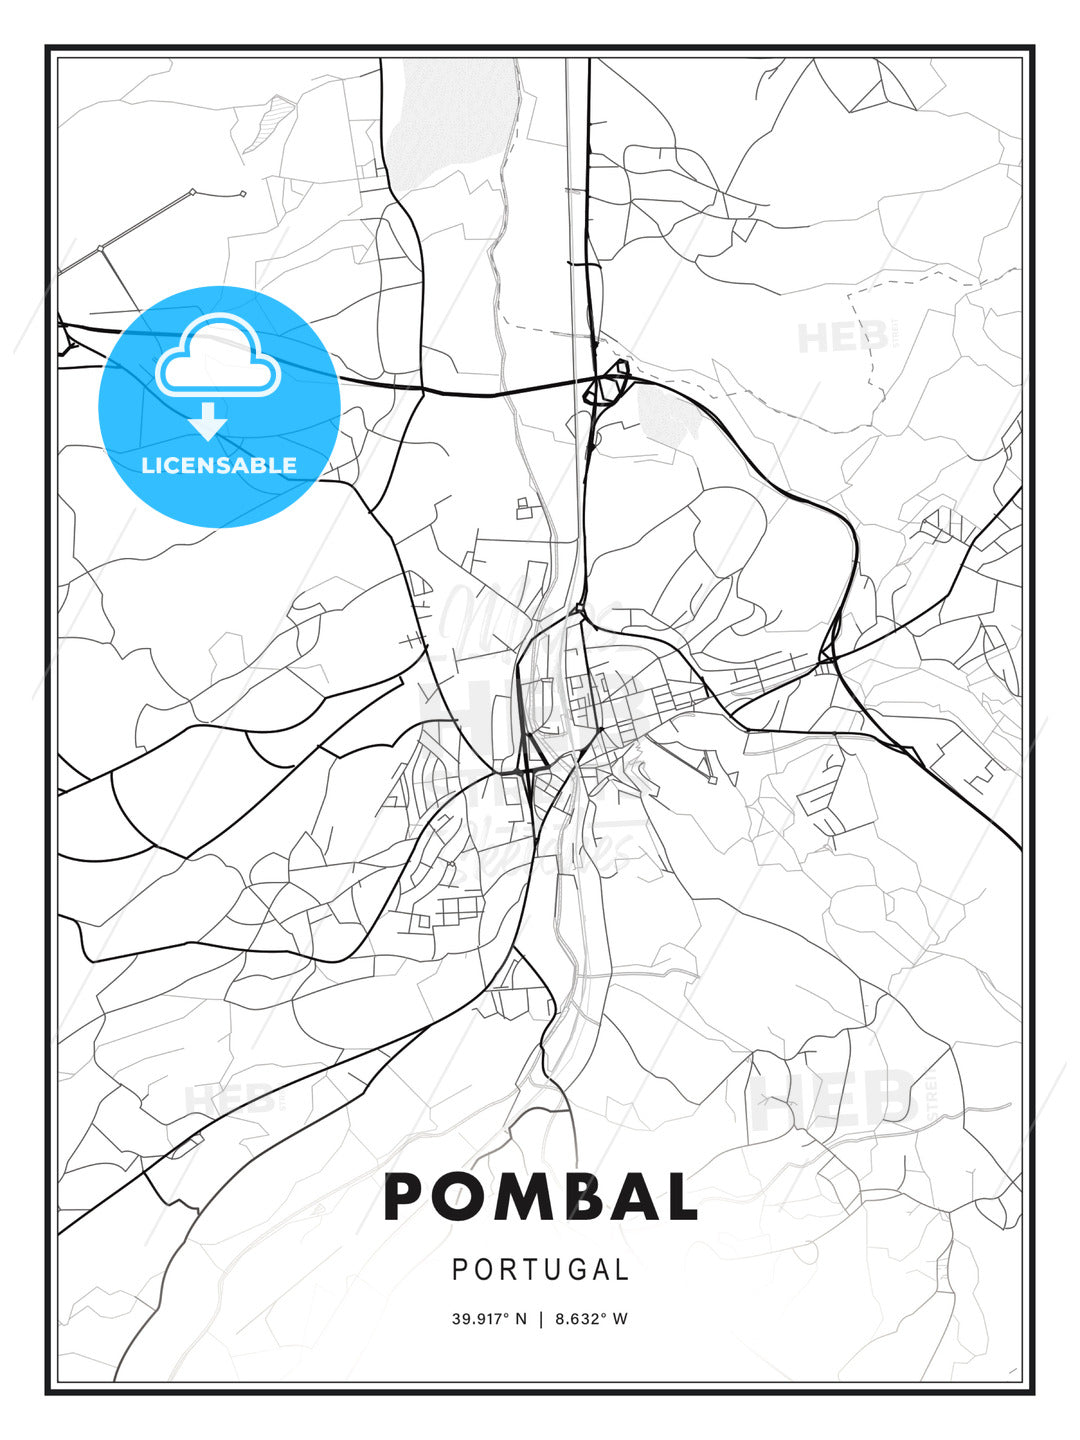 Pombal, Portugal, Modern Print Template in Various Formats - HEBSTREITS Sketches